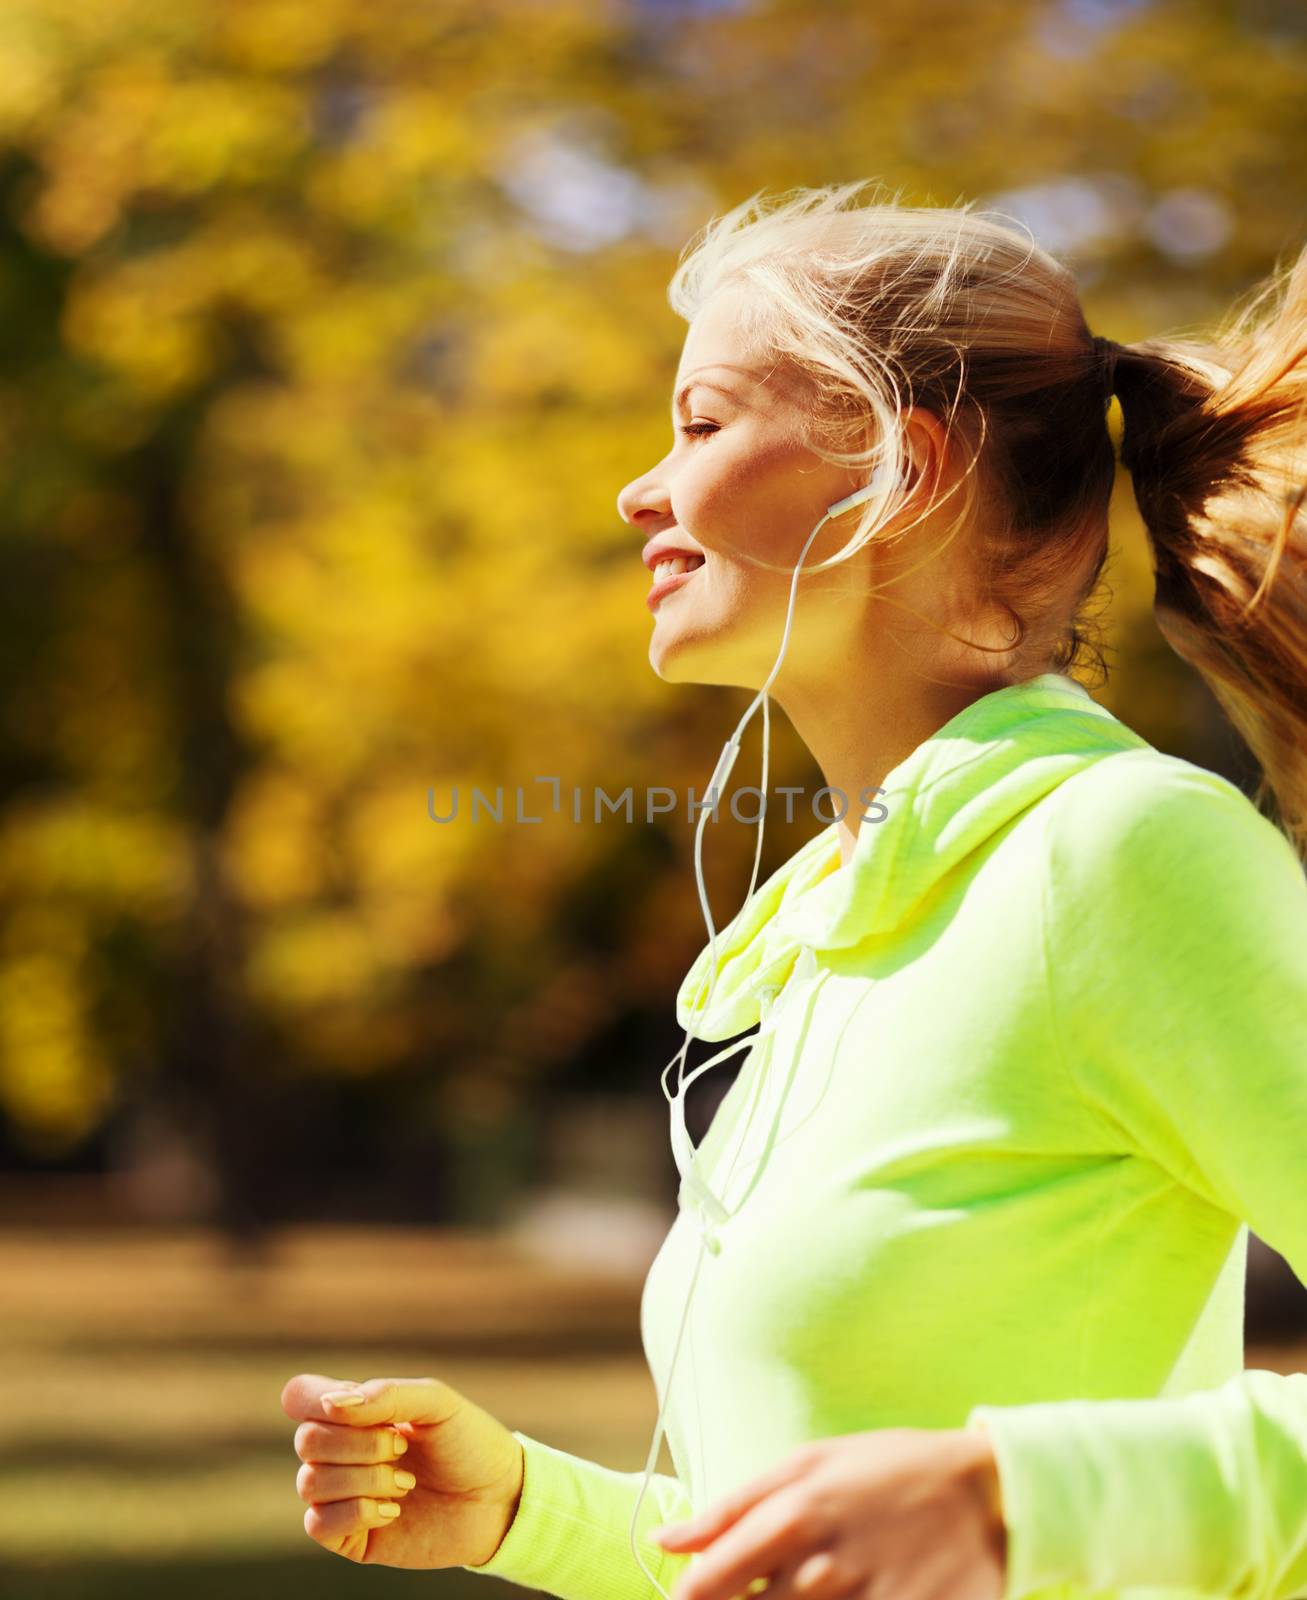 sport and lifestyle concept - woman doing running outdoors